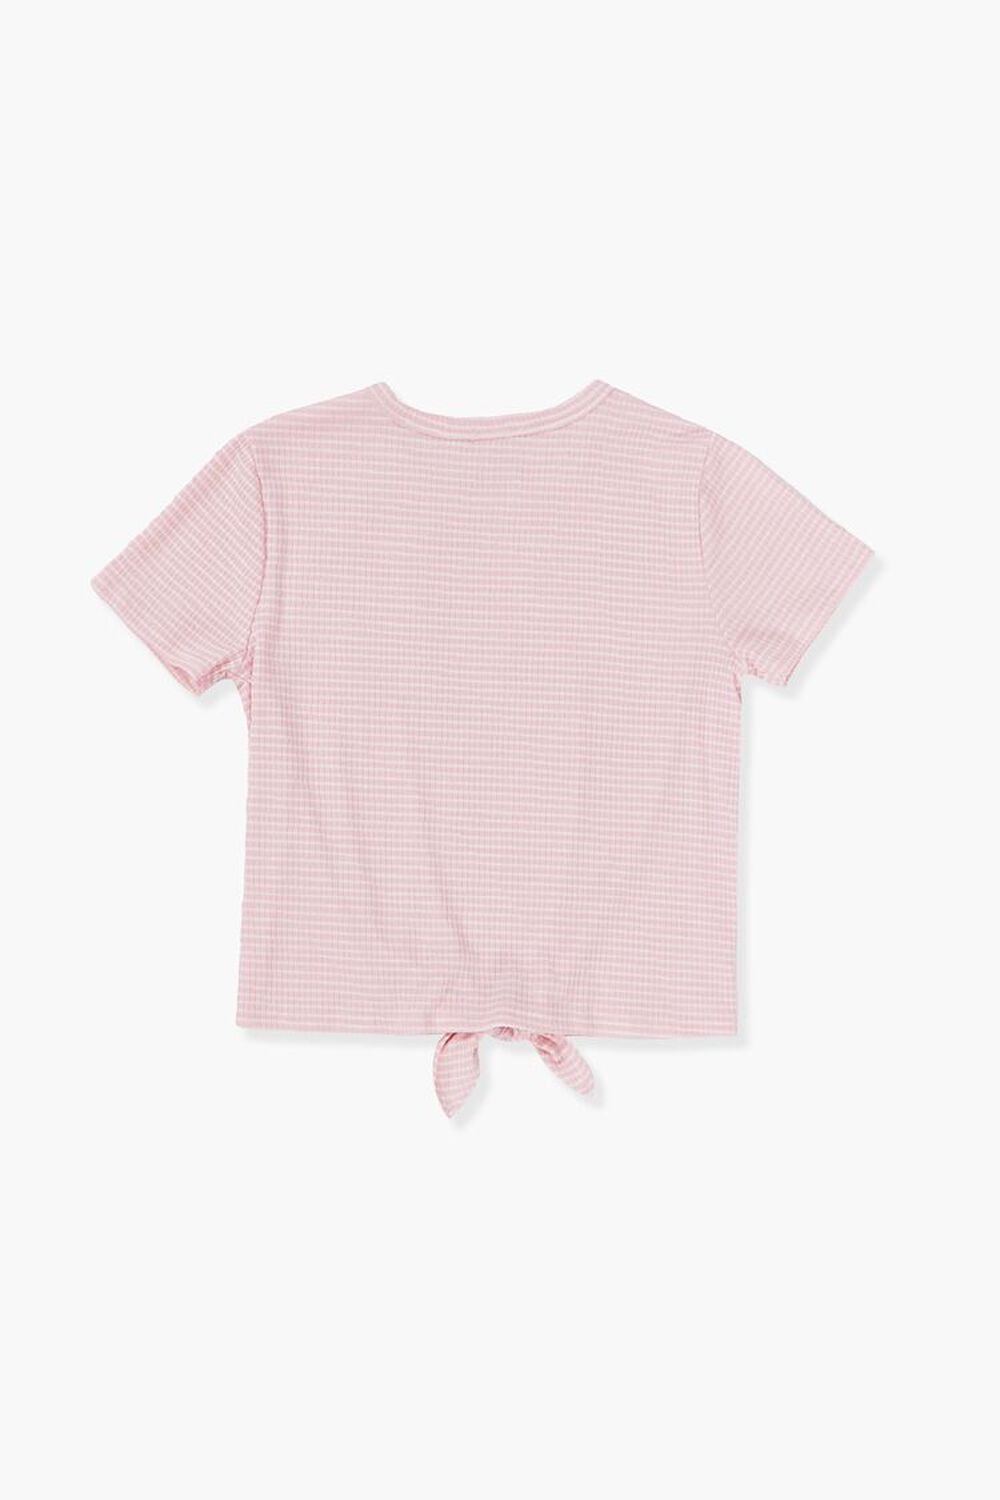 PINK/WHITE Girls Striped Knotted Tee (Kids), image 2